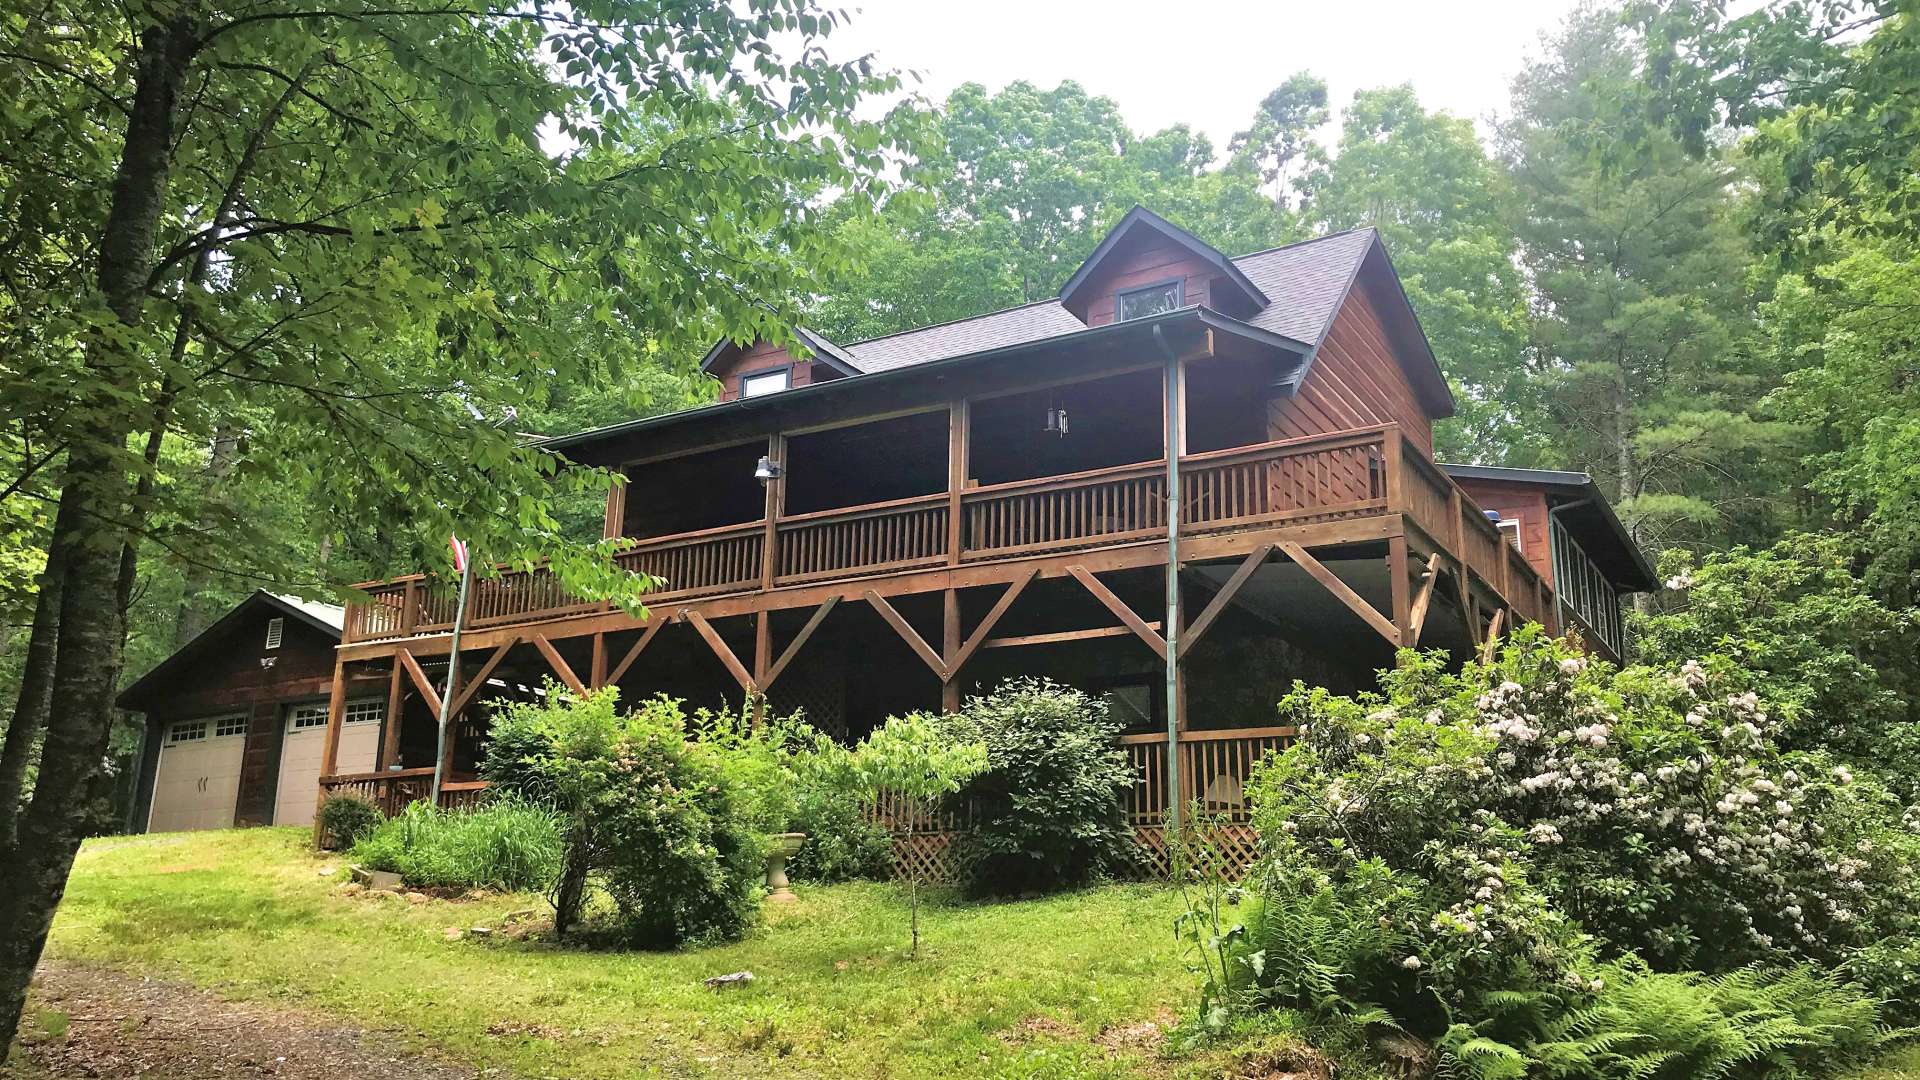 Call today for additional information on listing K151, a  2-bedroom, plus loft, 3-bath log cabin nestled in the woods in the  Painted Laurel community and offered at $265,000.